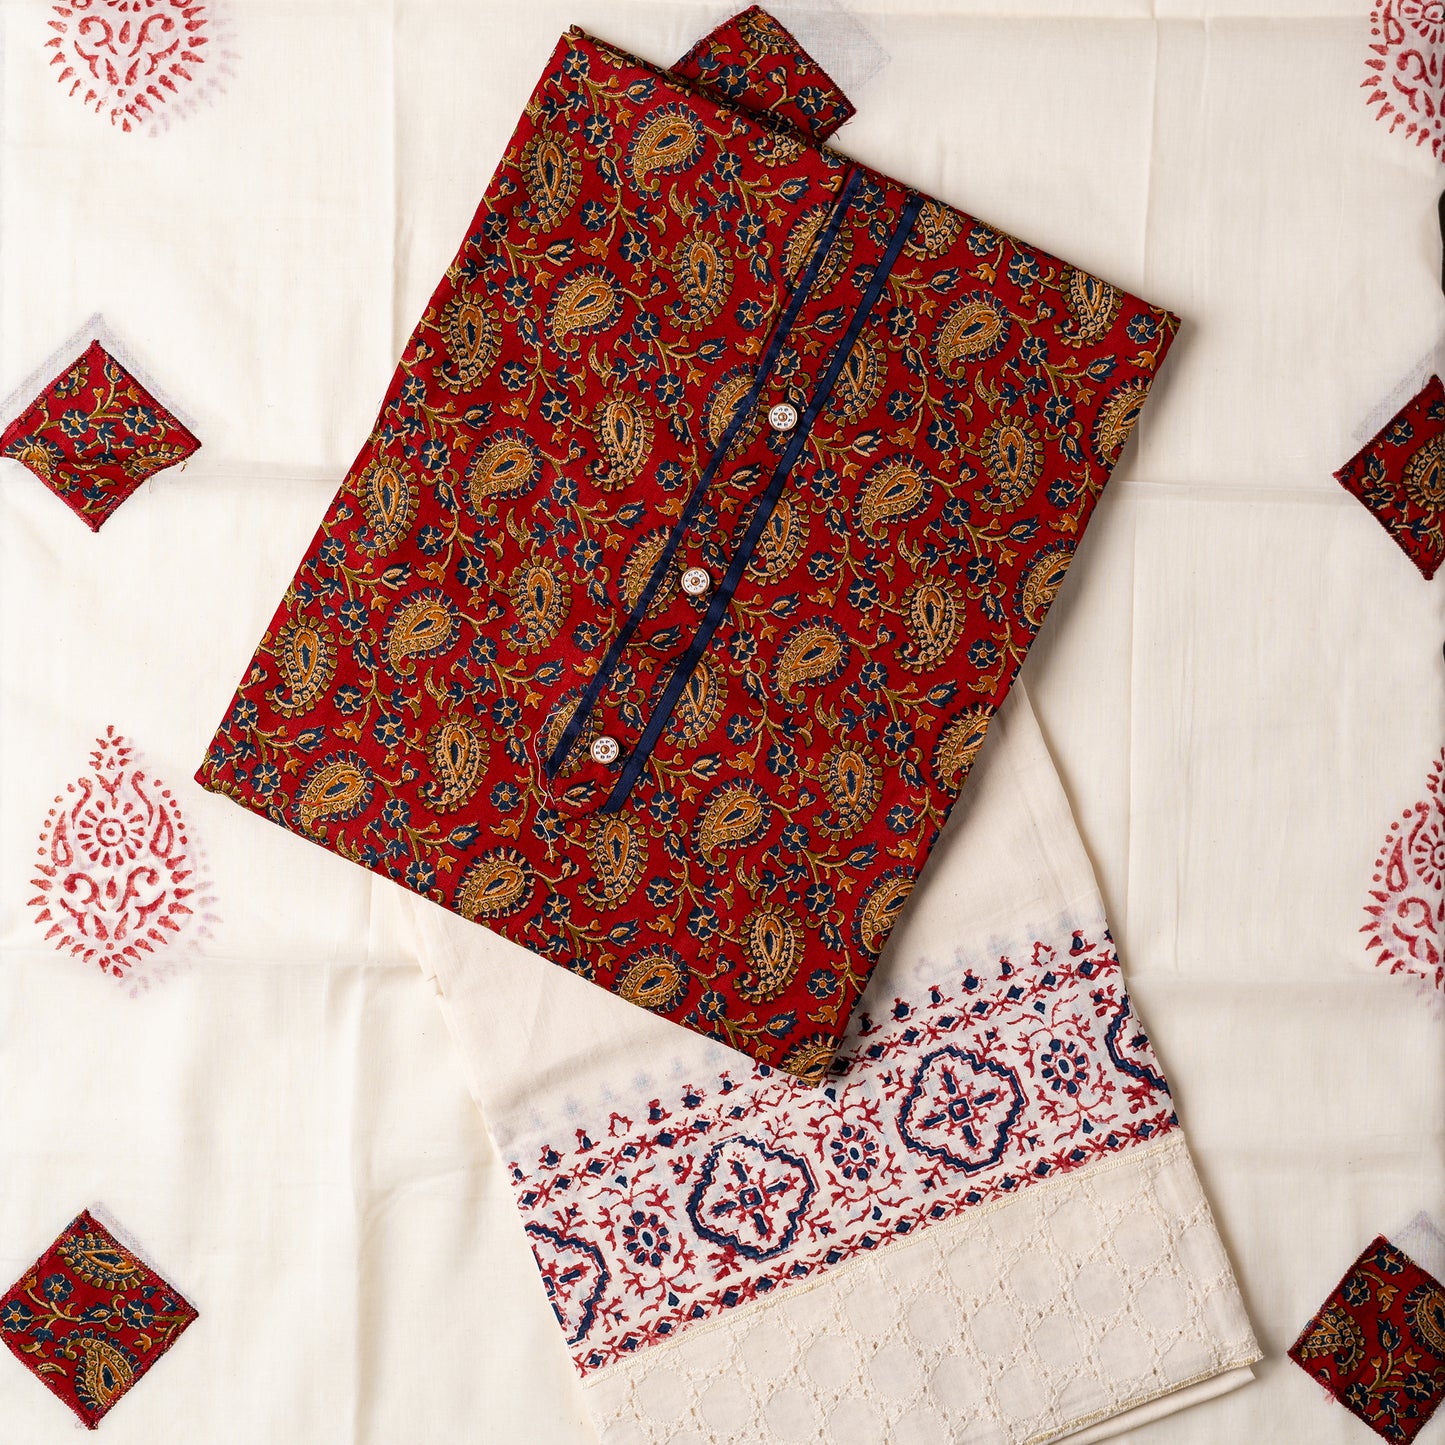 Churidar set, Cotton top with maroon color base and multi color print design, buttons and contrast color piping in yoke, cream color cotton bottom with hakoba design at the edges and print. Cotton dupatta with matching color prints and cut work